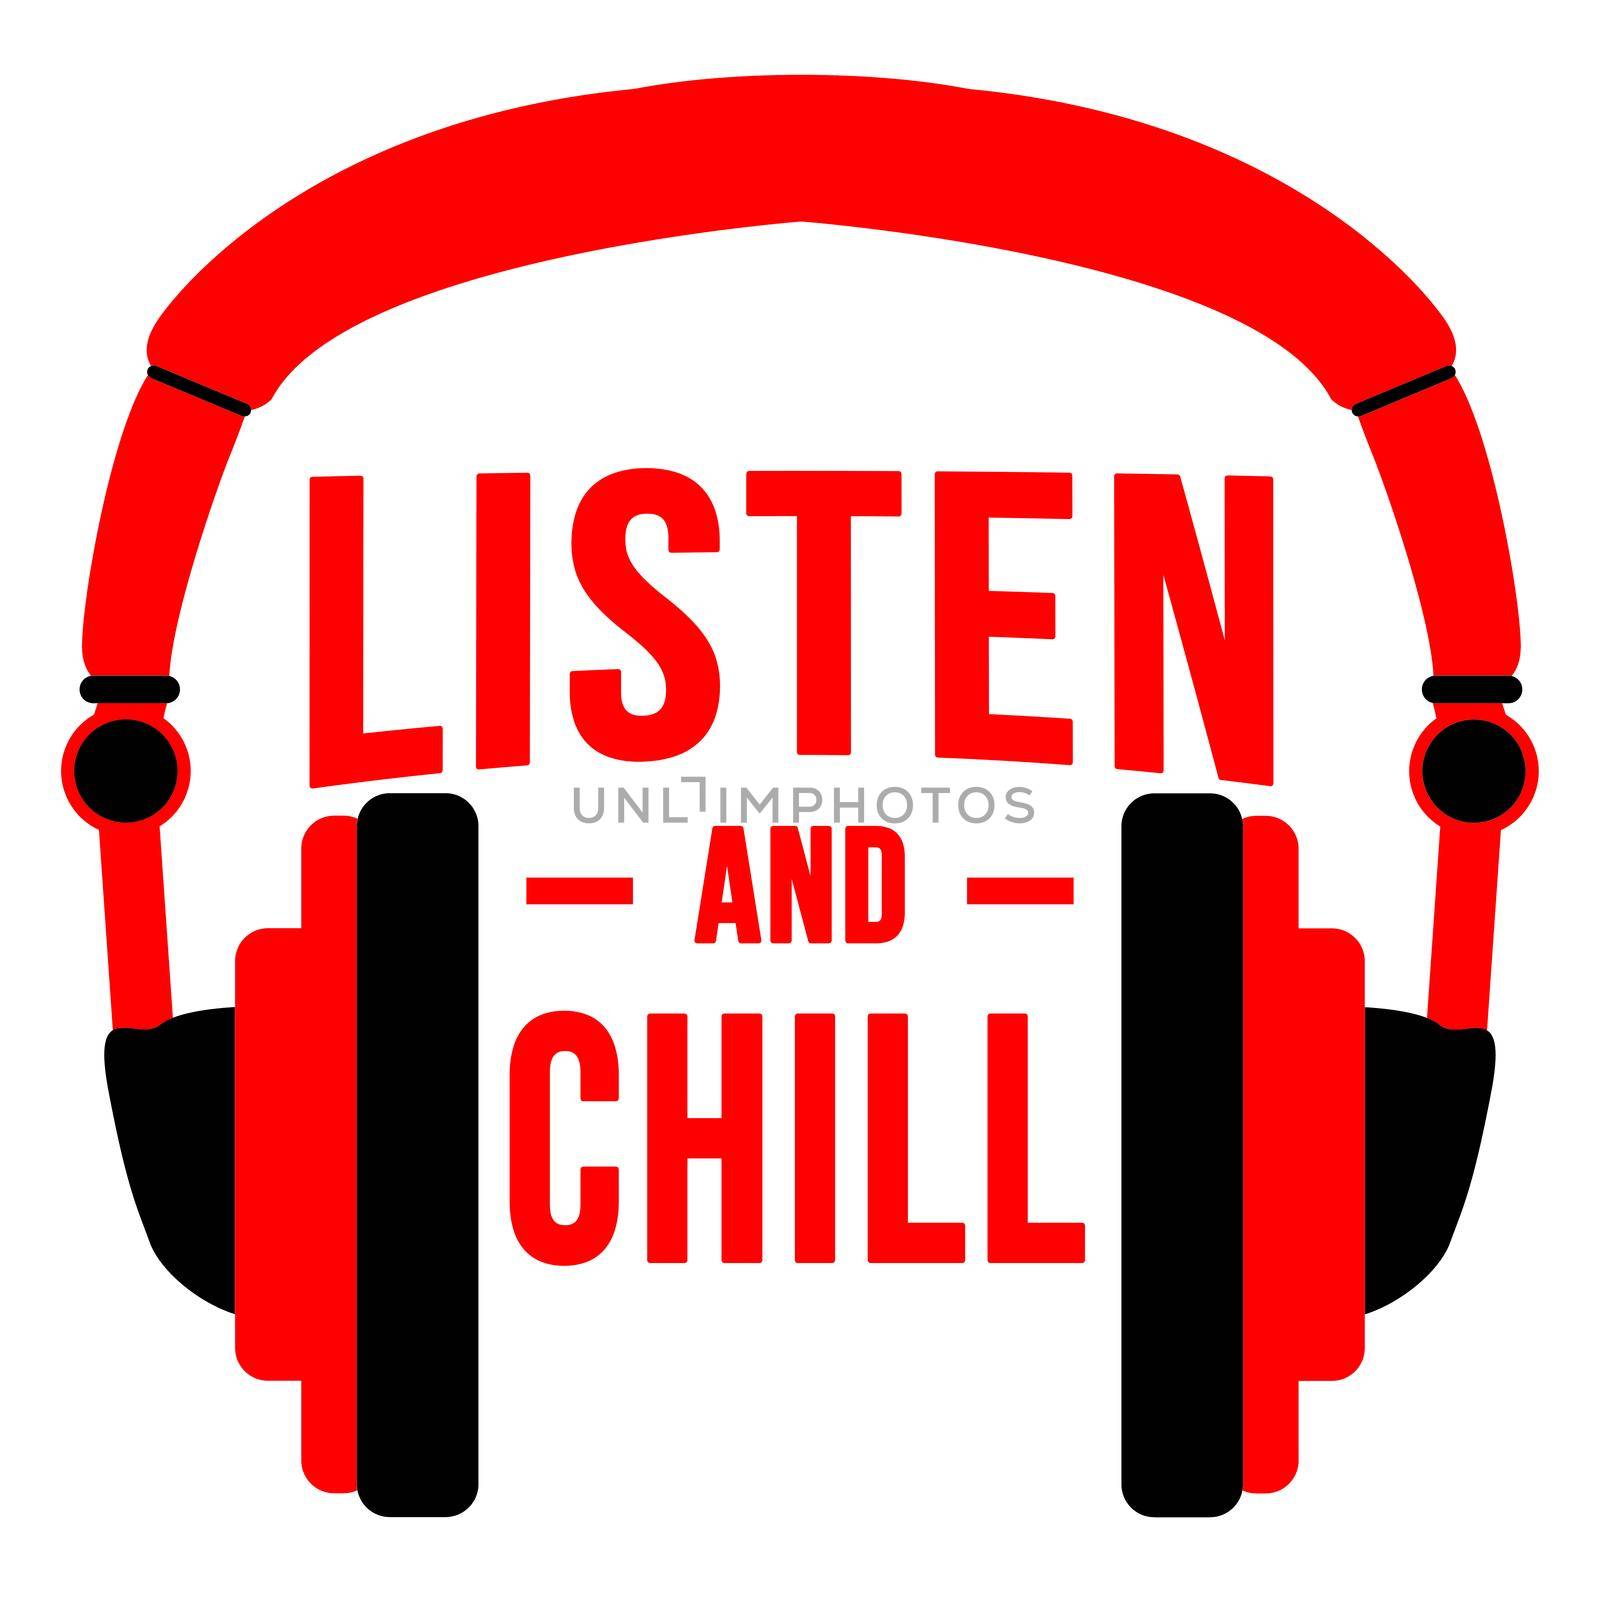 Listen and chill